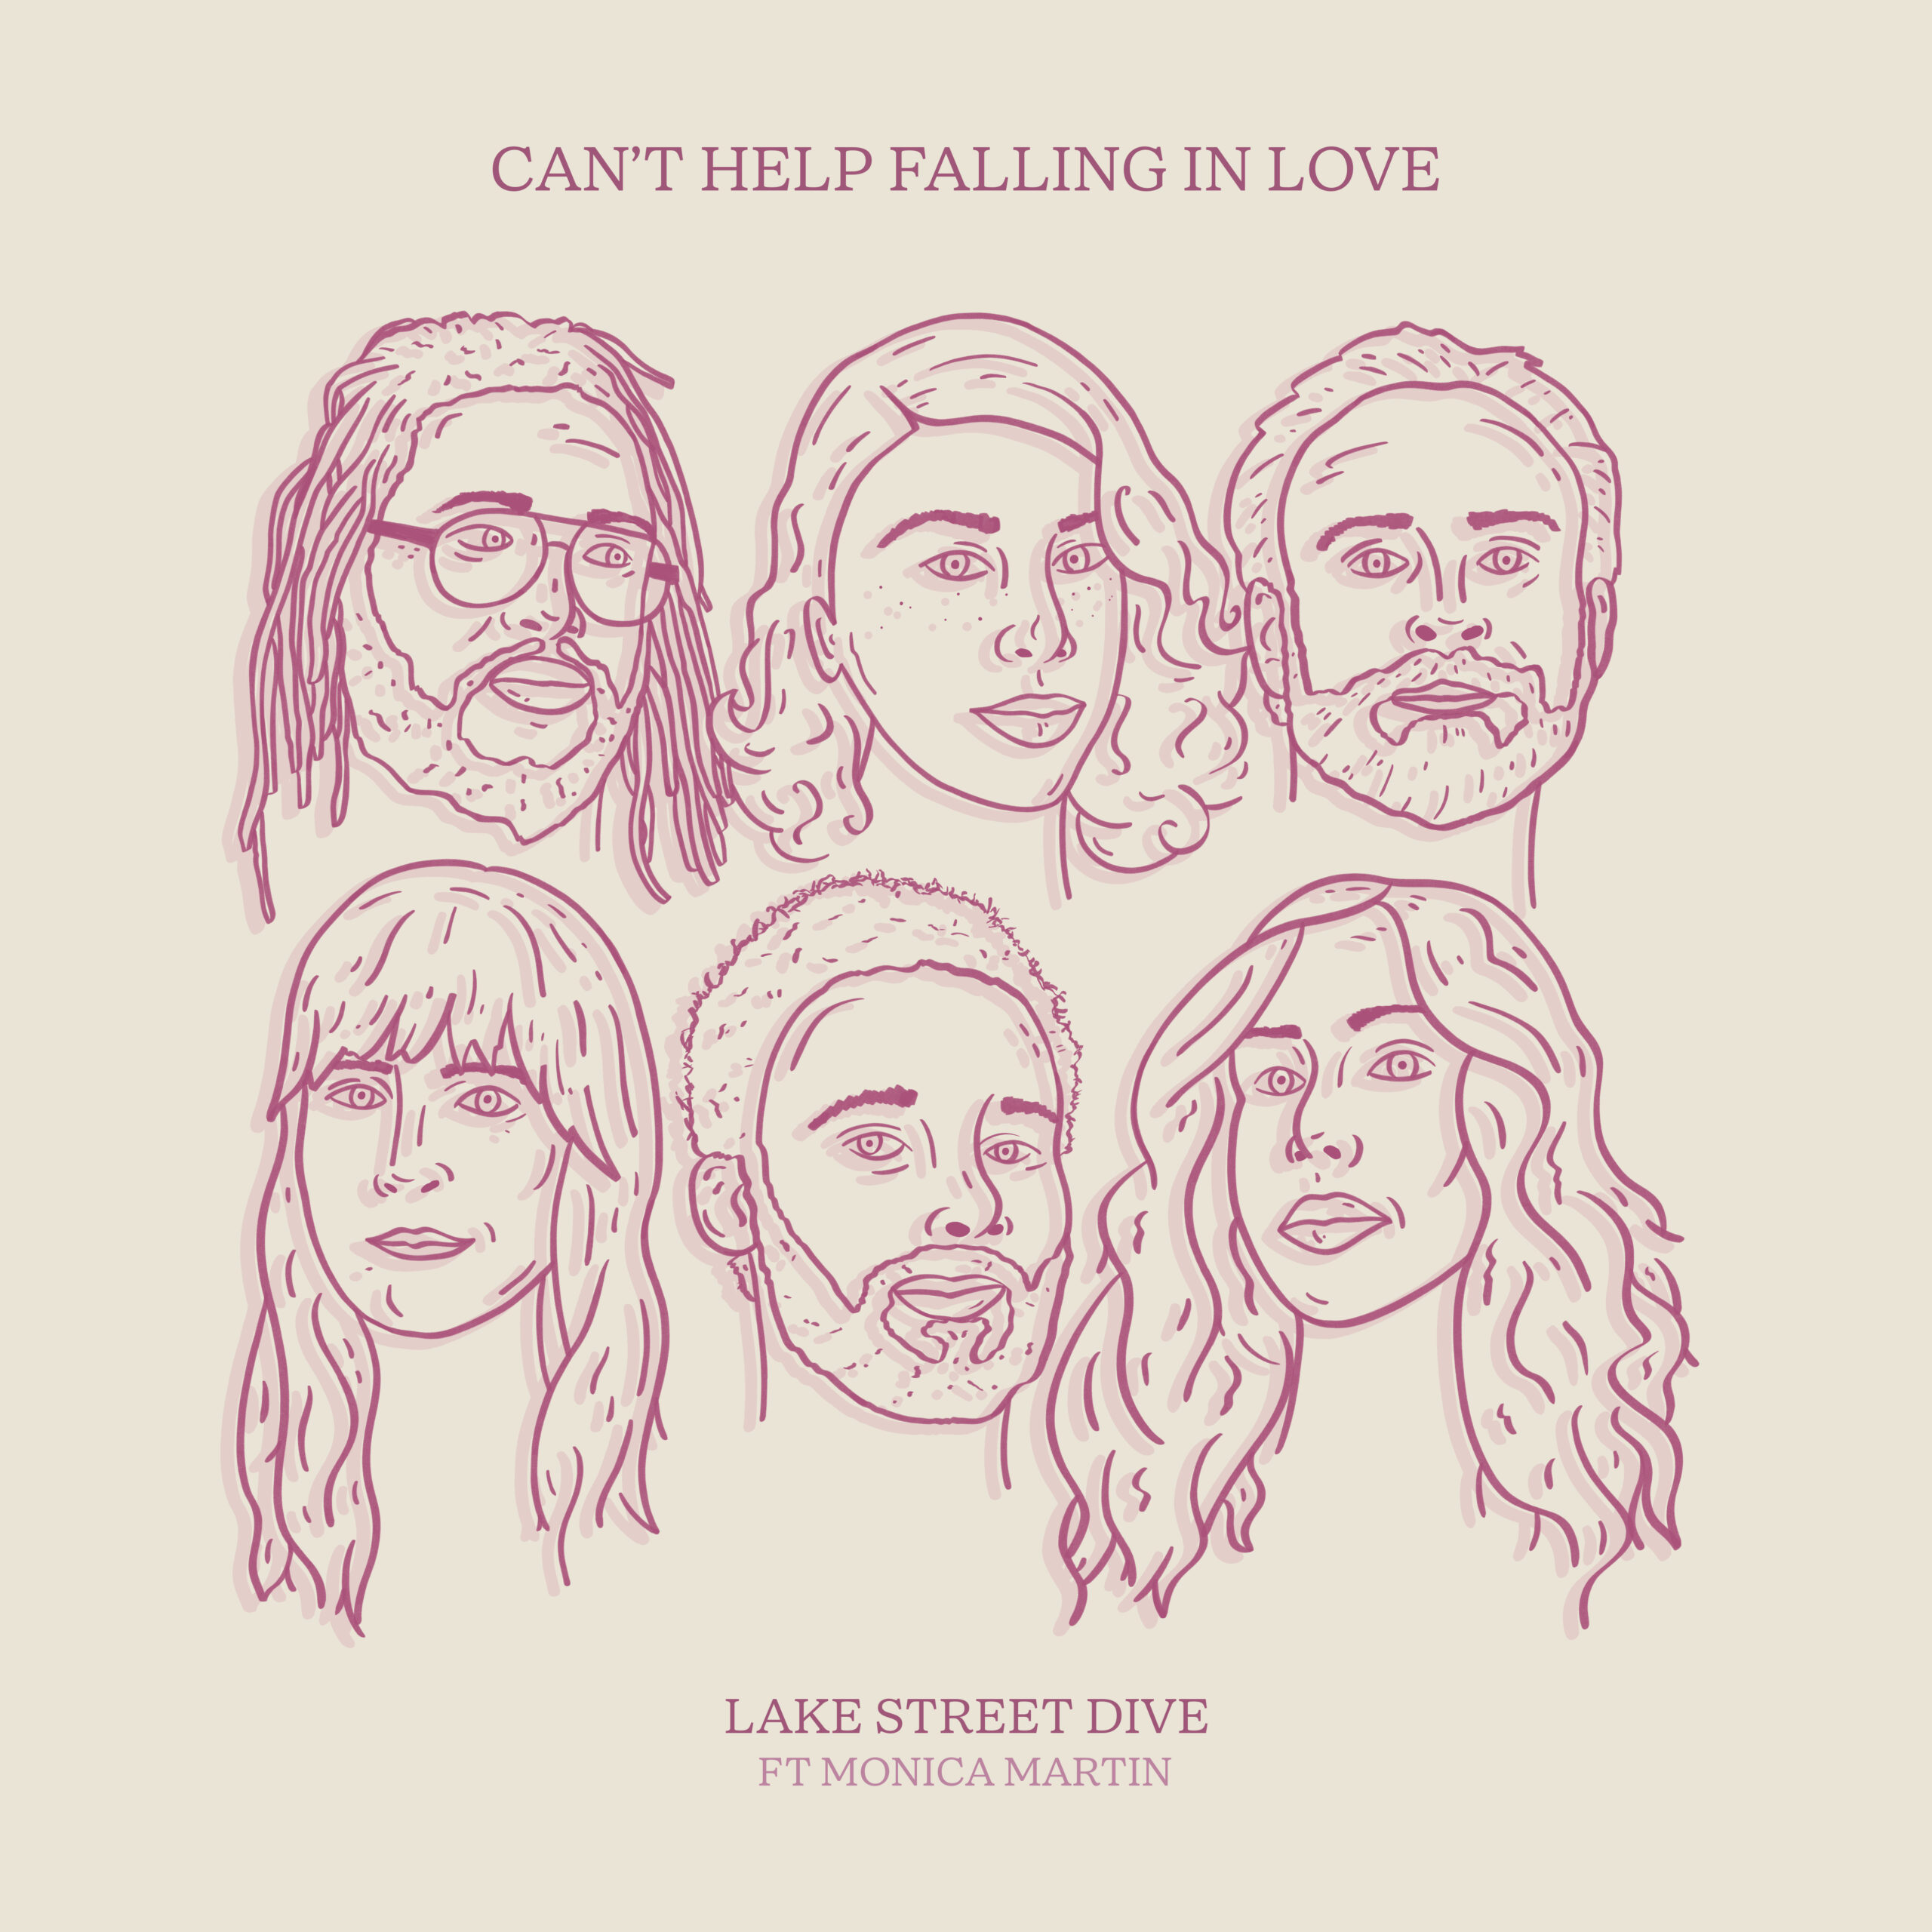 LAKE STREET DIVE SHARES CAN'T HELP FALLING IN LOVE FEATURING